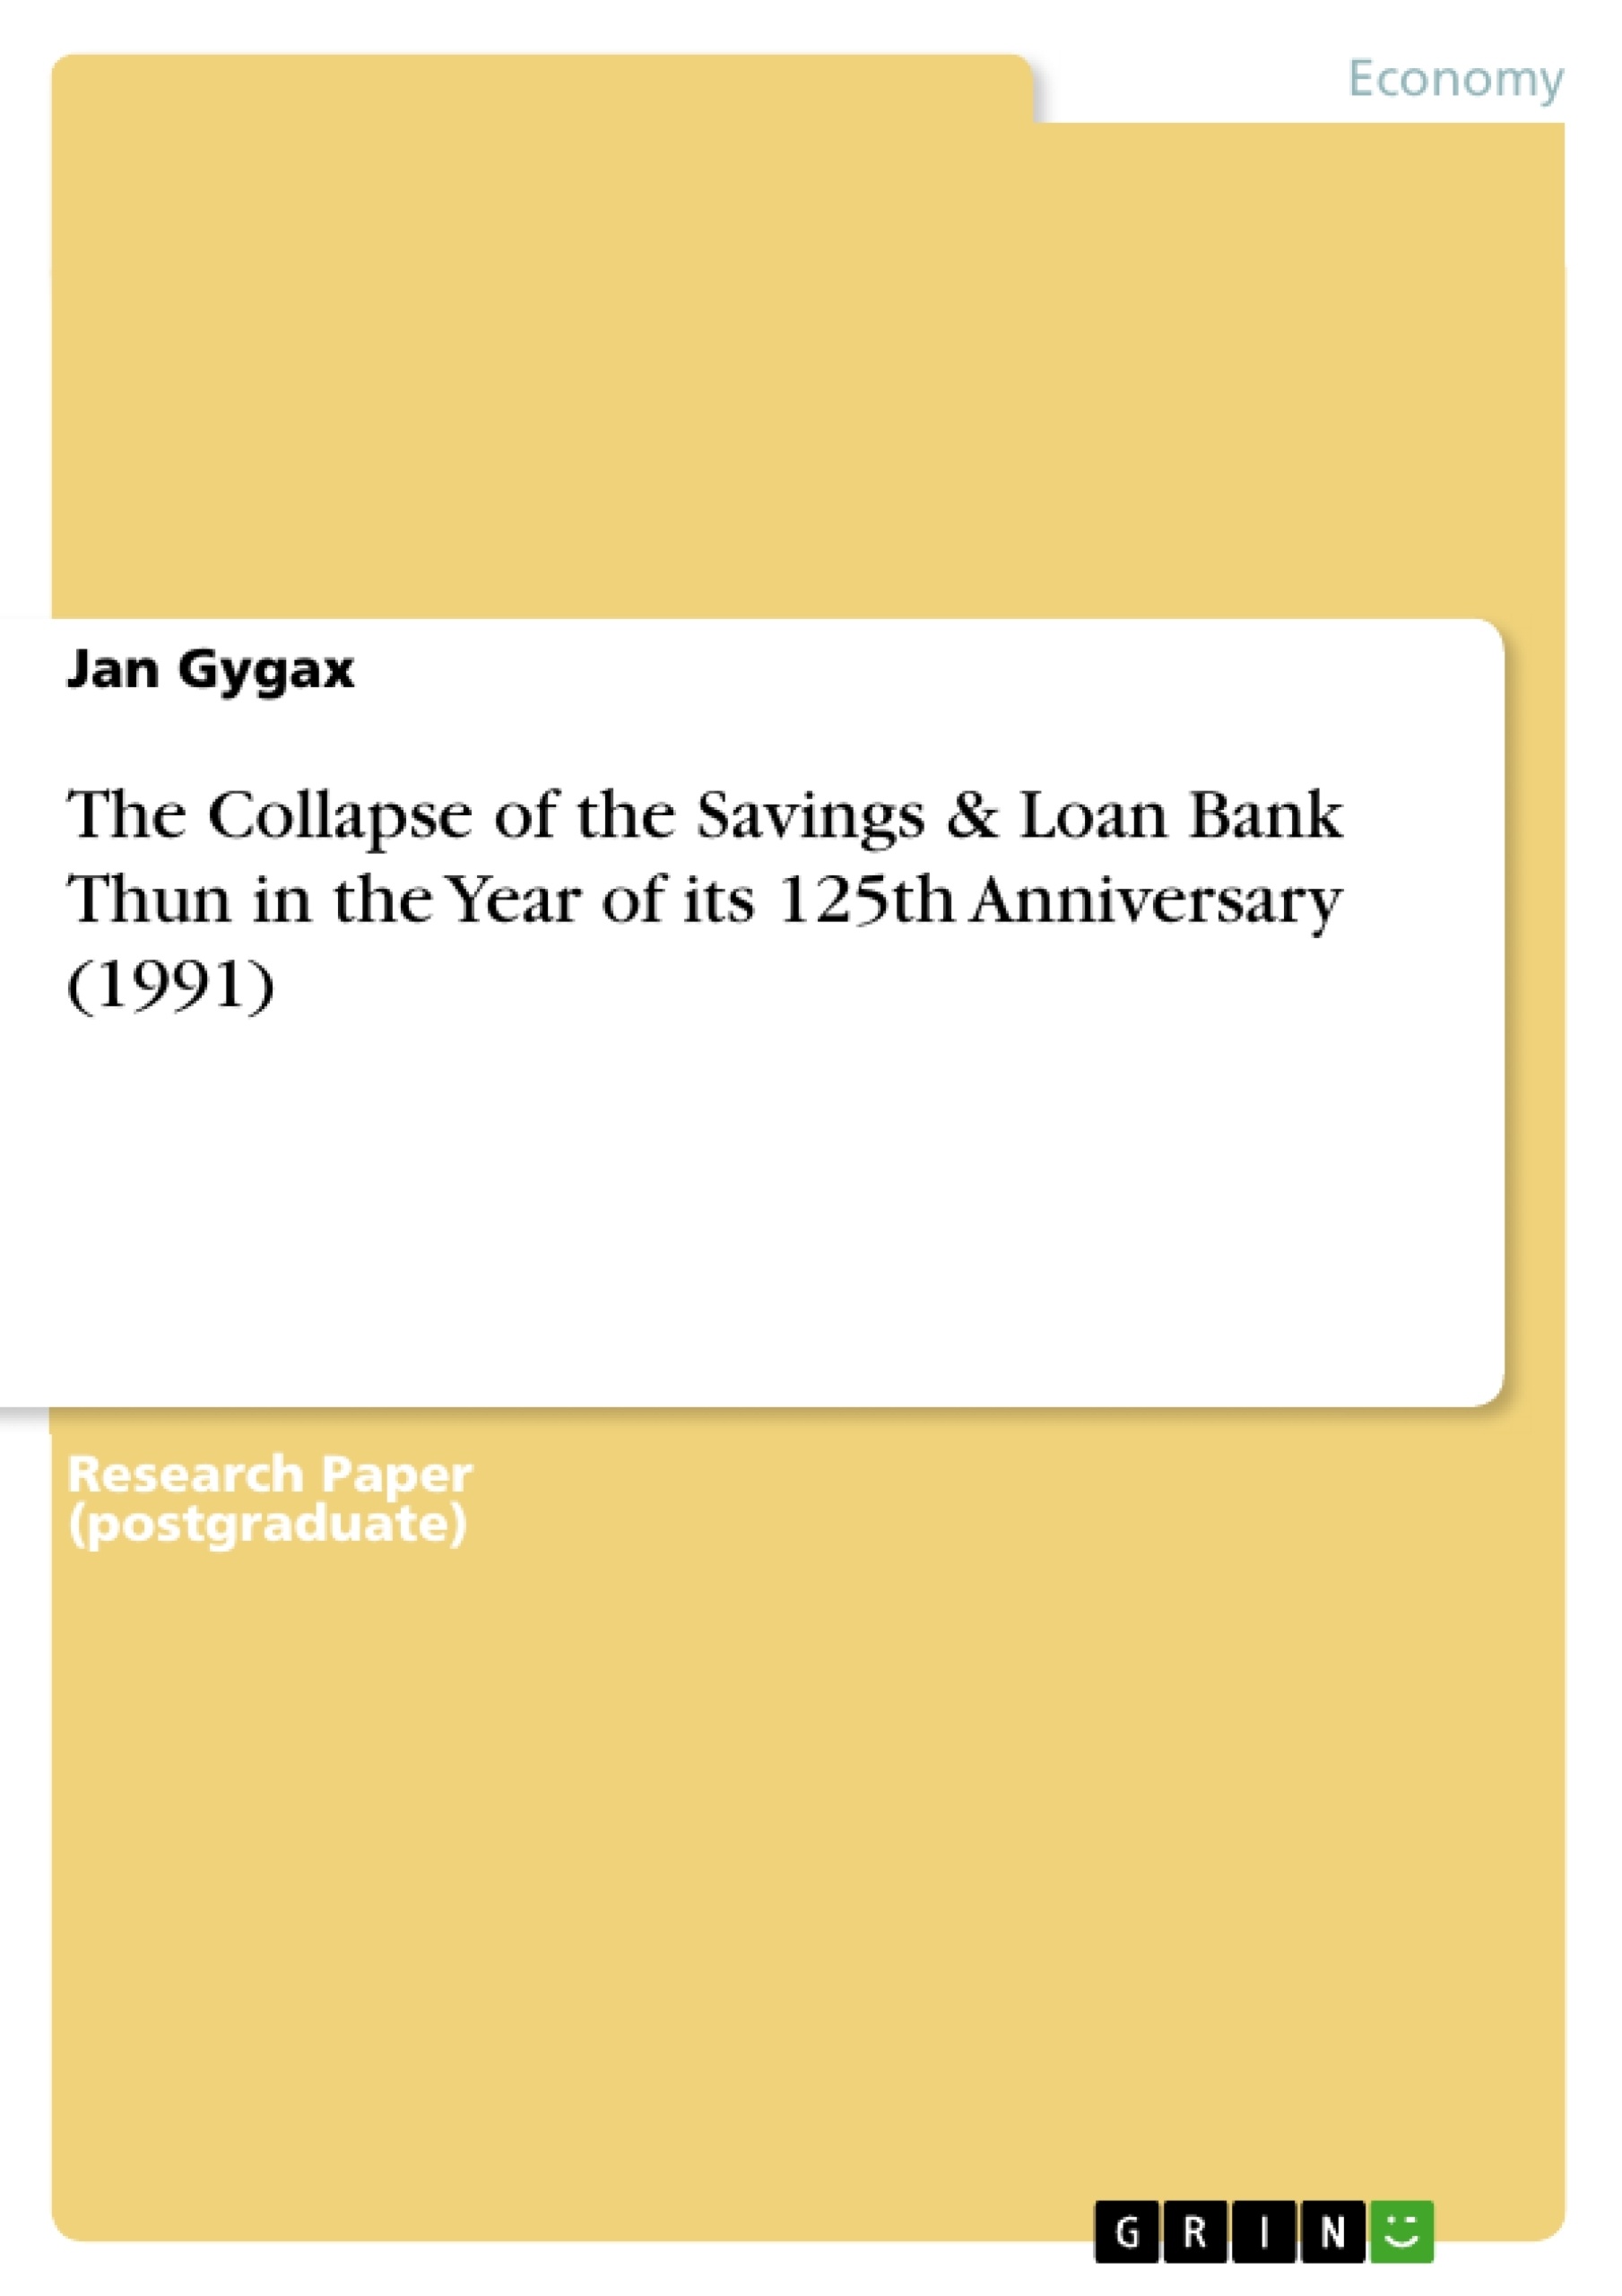 Título: The Collapse of the Savings & Loan Bank Thun in the Year of its 125th Anniversary (1991)